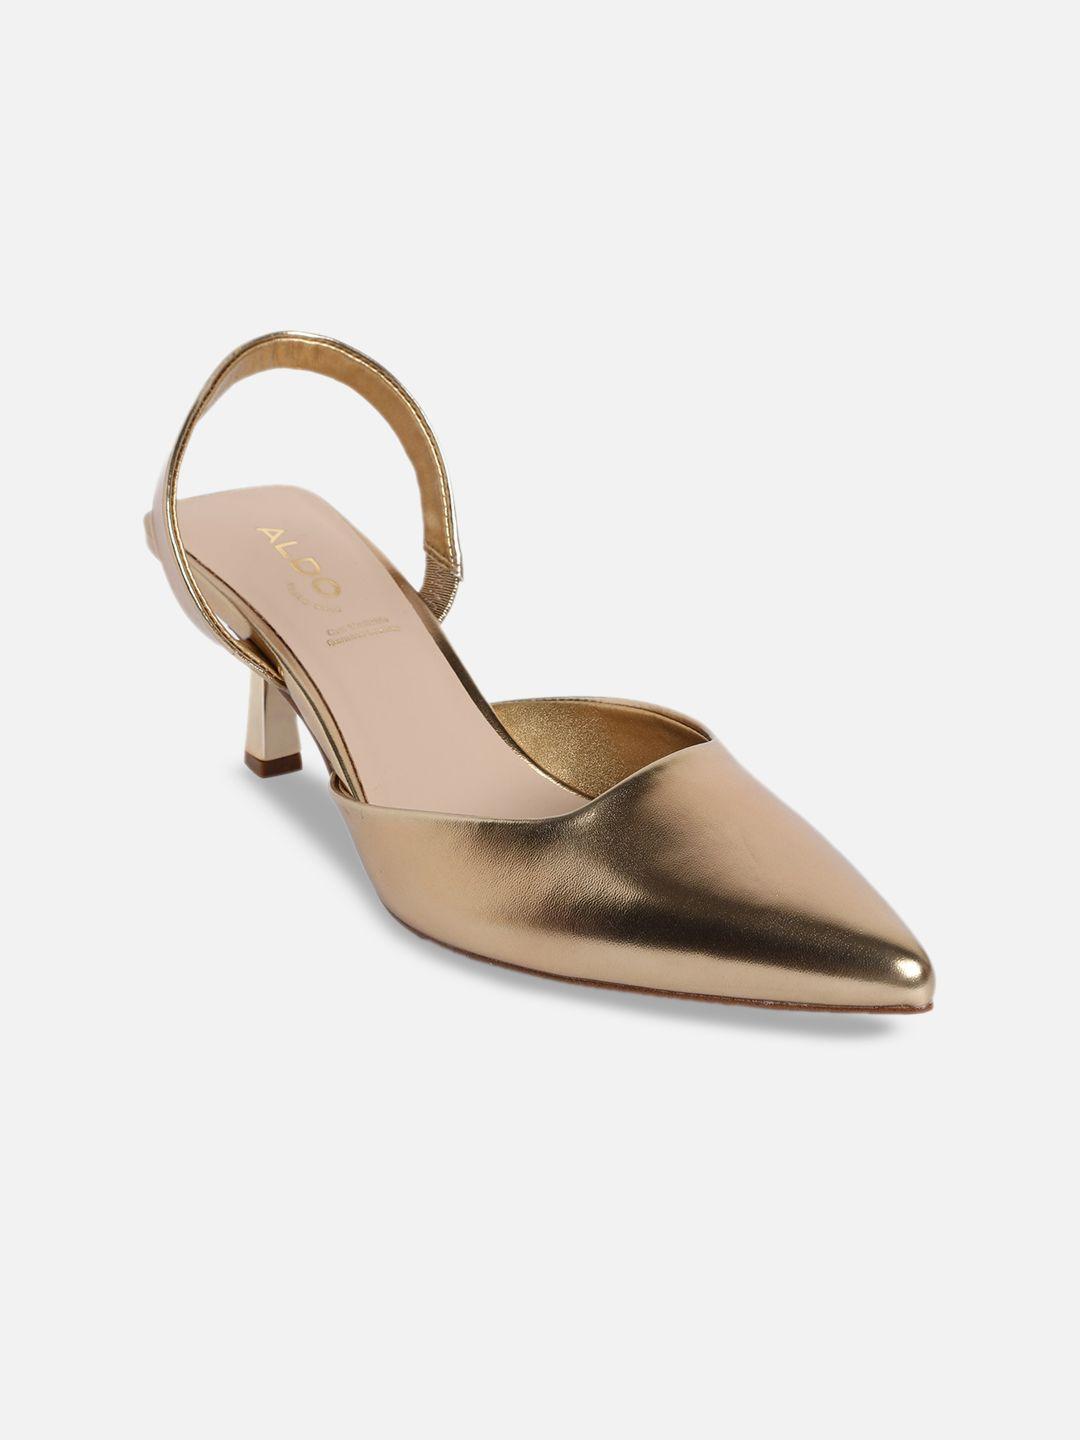 aldo pointed toe leather mules with backstrap